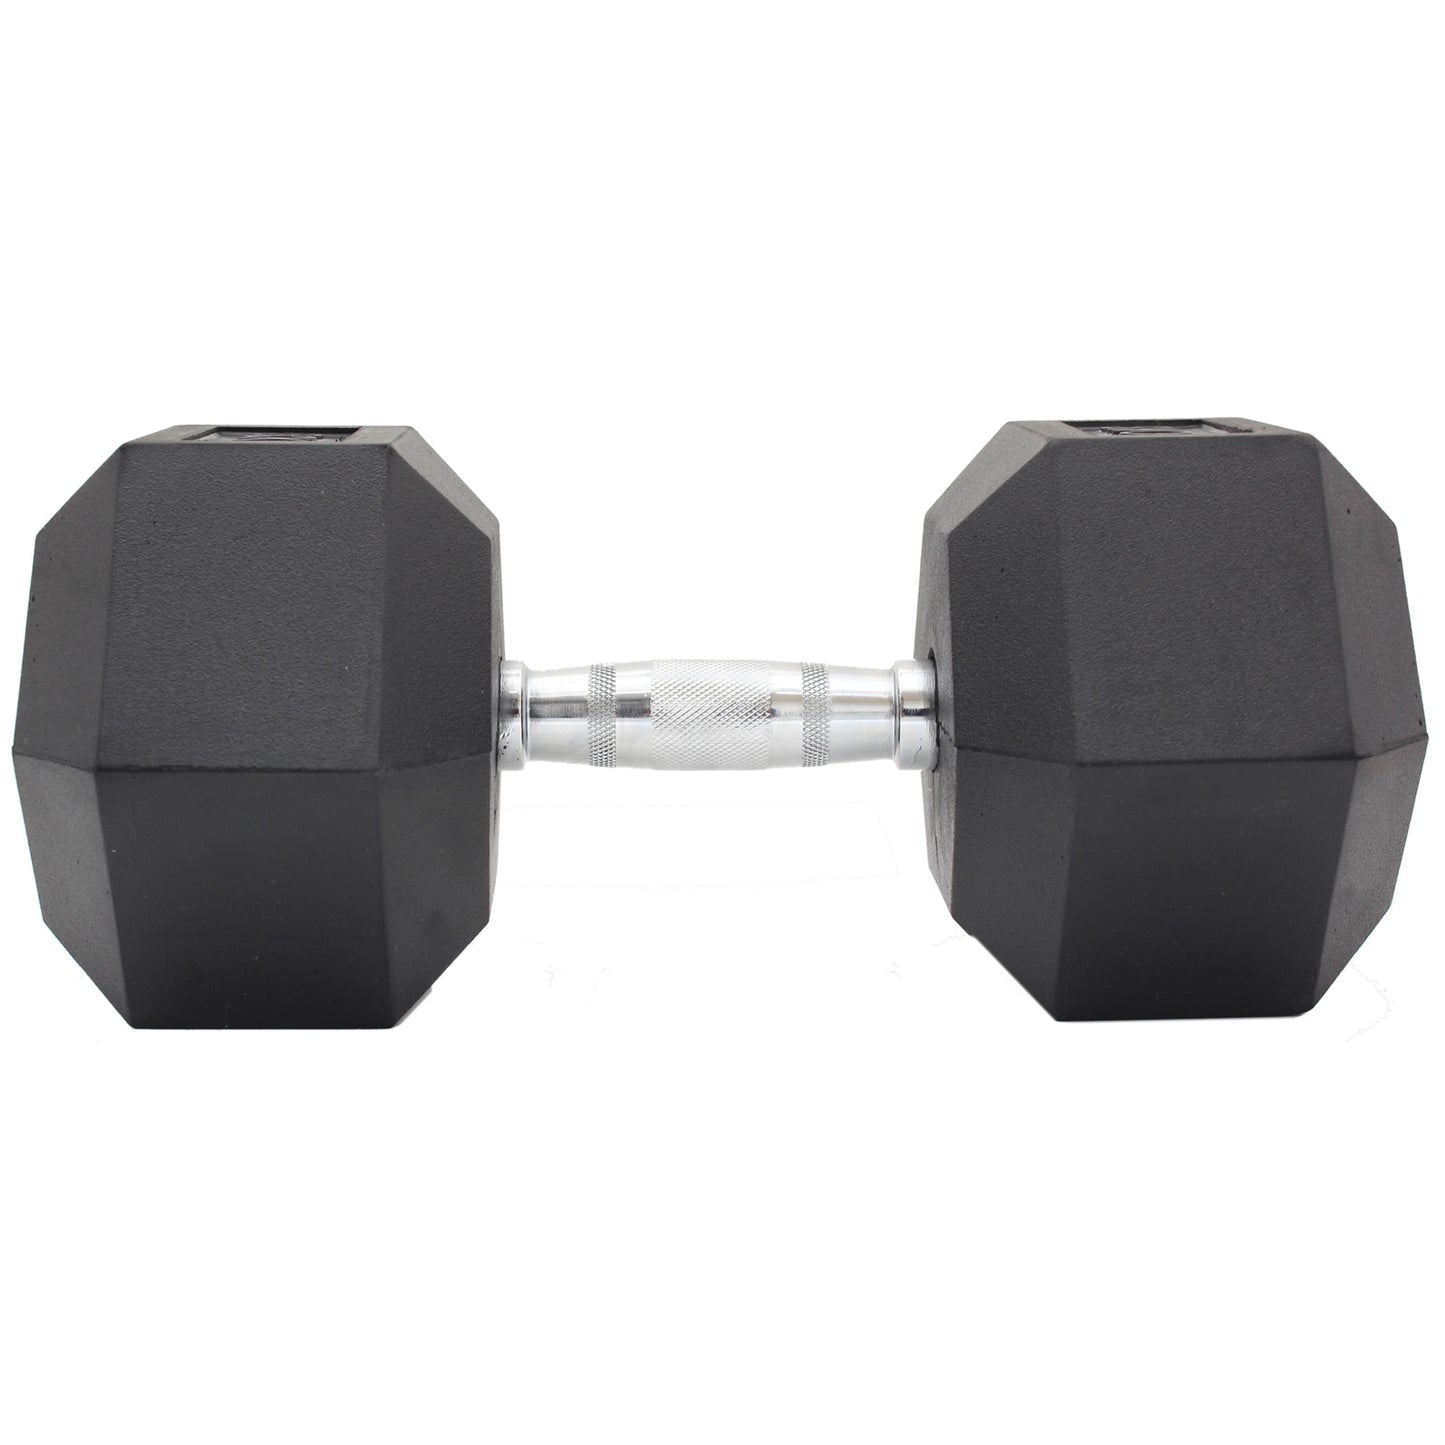 10KG Commercial Rubber Hex Dumbbell Gym Weight - image2